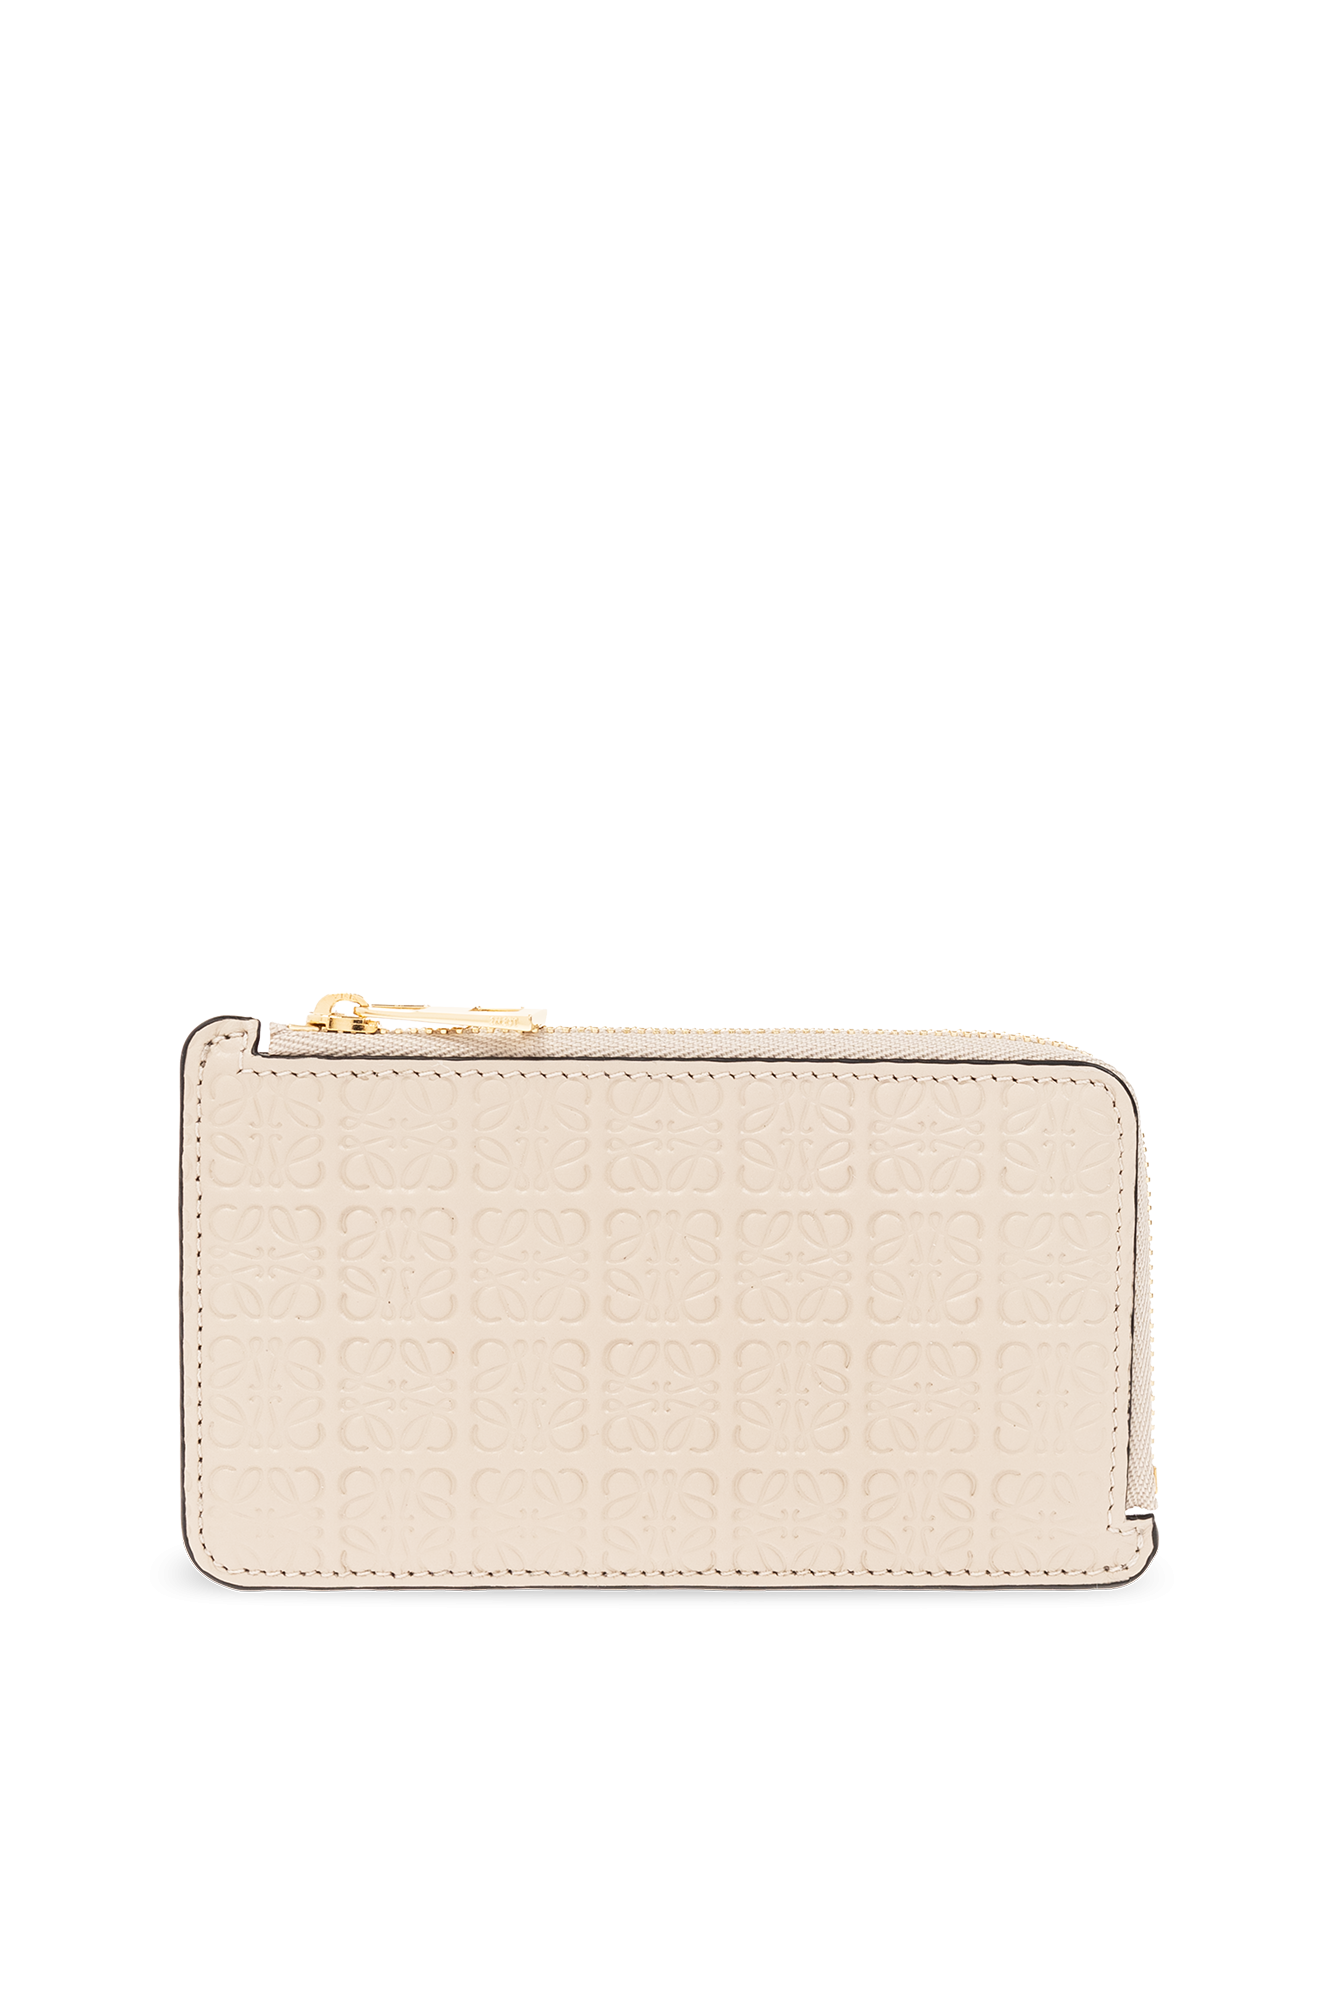 Celine Beige Quilted Calfskin Leather Coin and Card Pouch C Charm